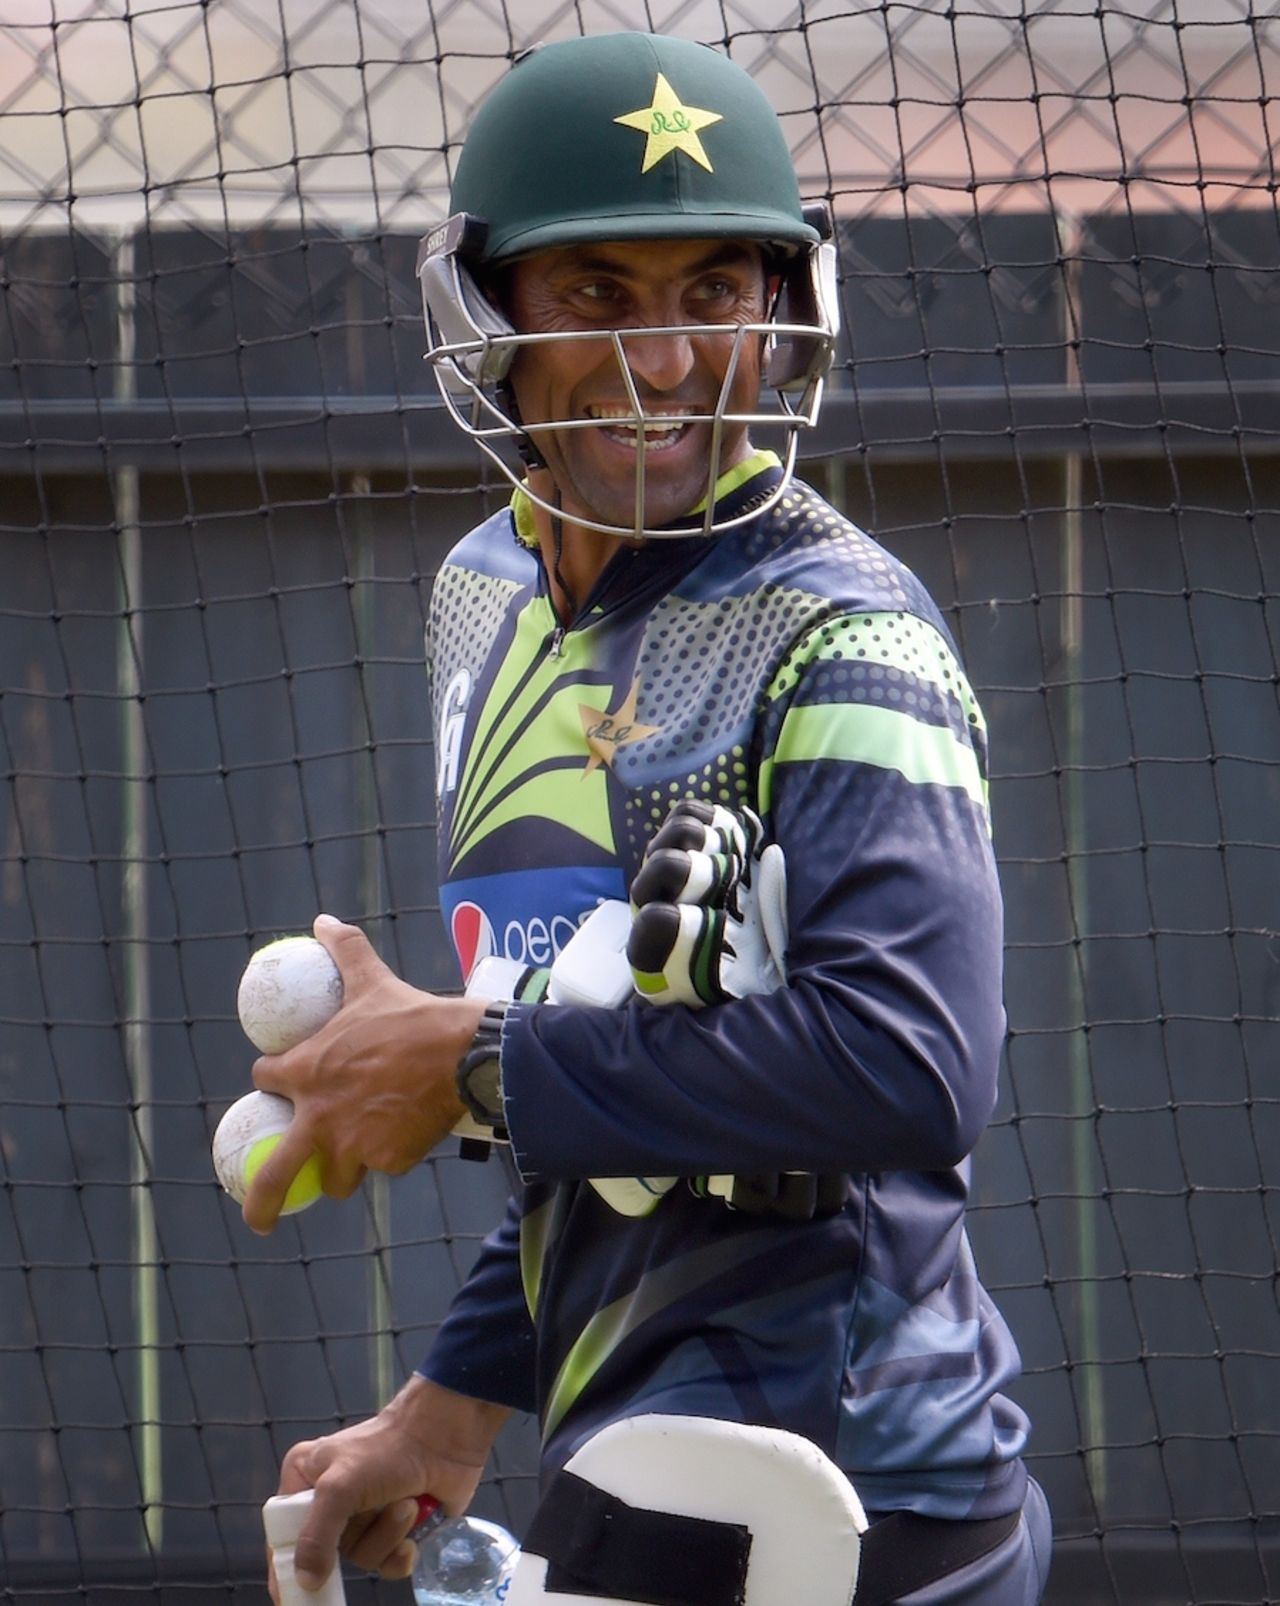 Younis Khan finds a reason to laugh in the nets, World Cup 2015, Adelaide, February 14, 2015